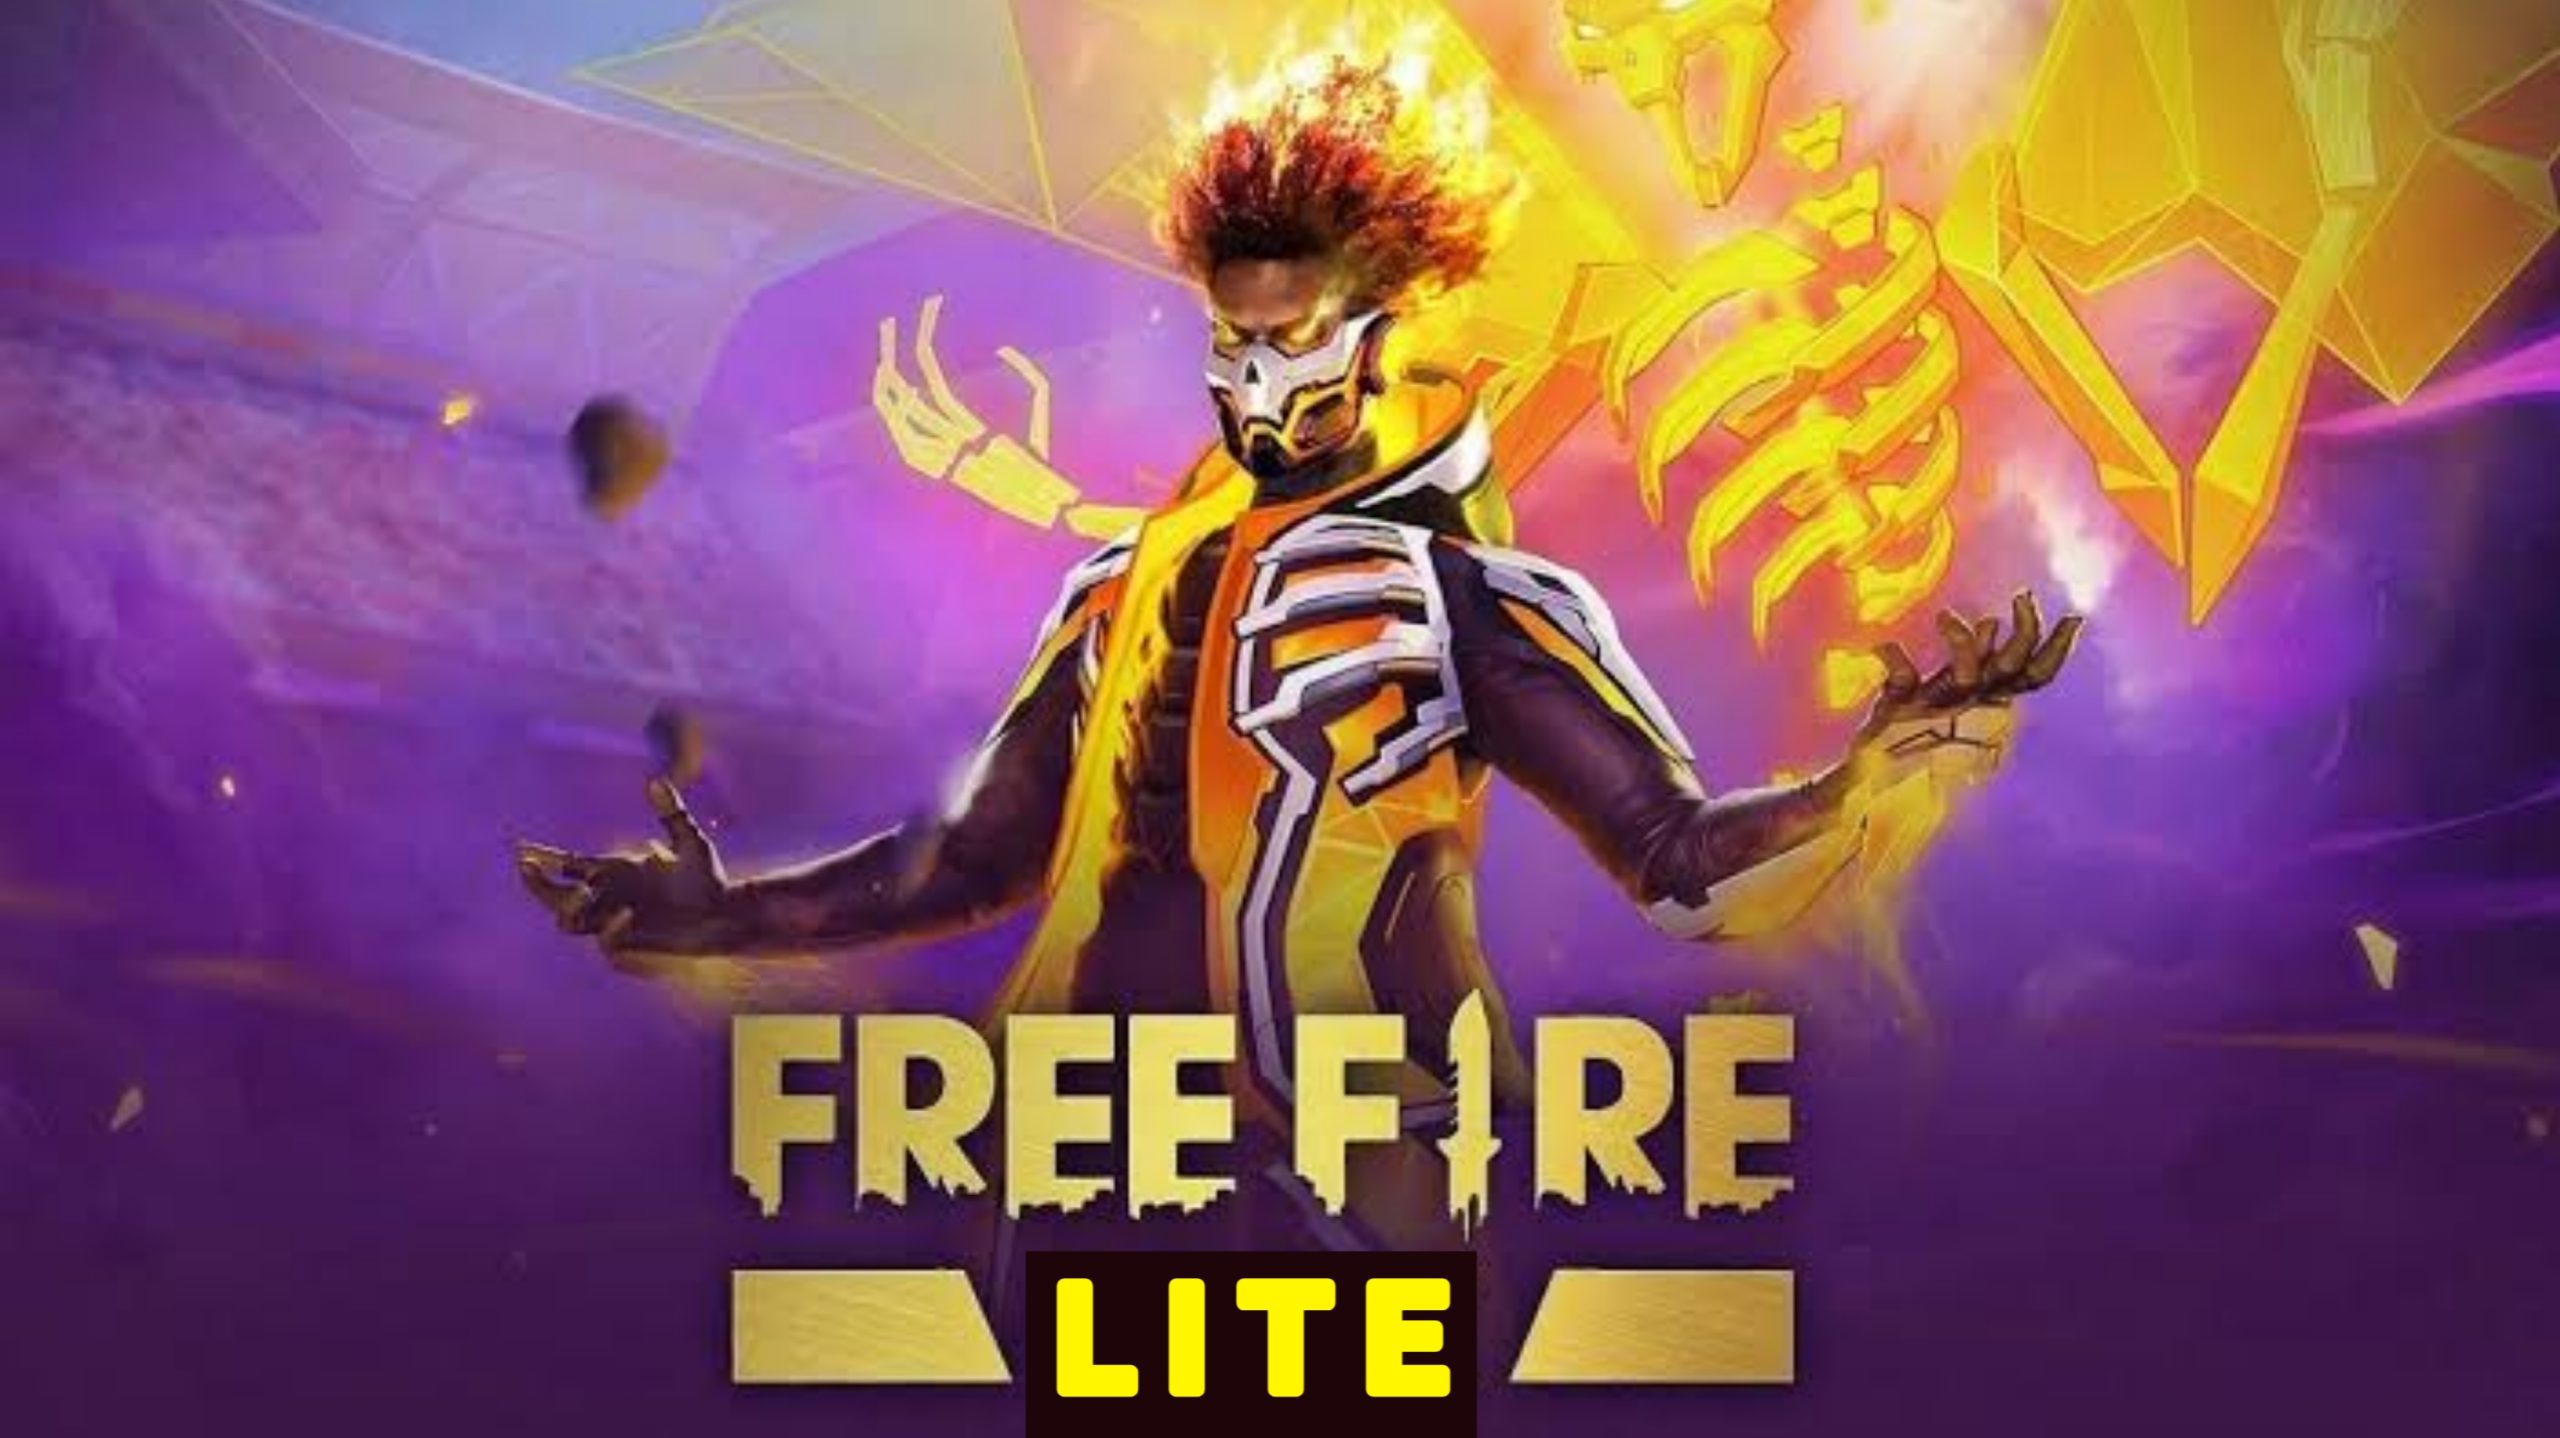 How to Download Free Fire Lite | Free Fire Lite Download Kaise Kare